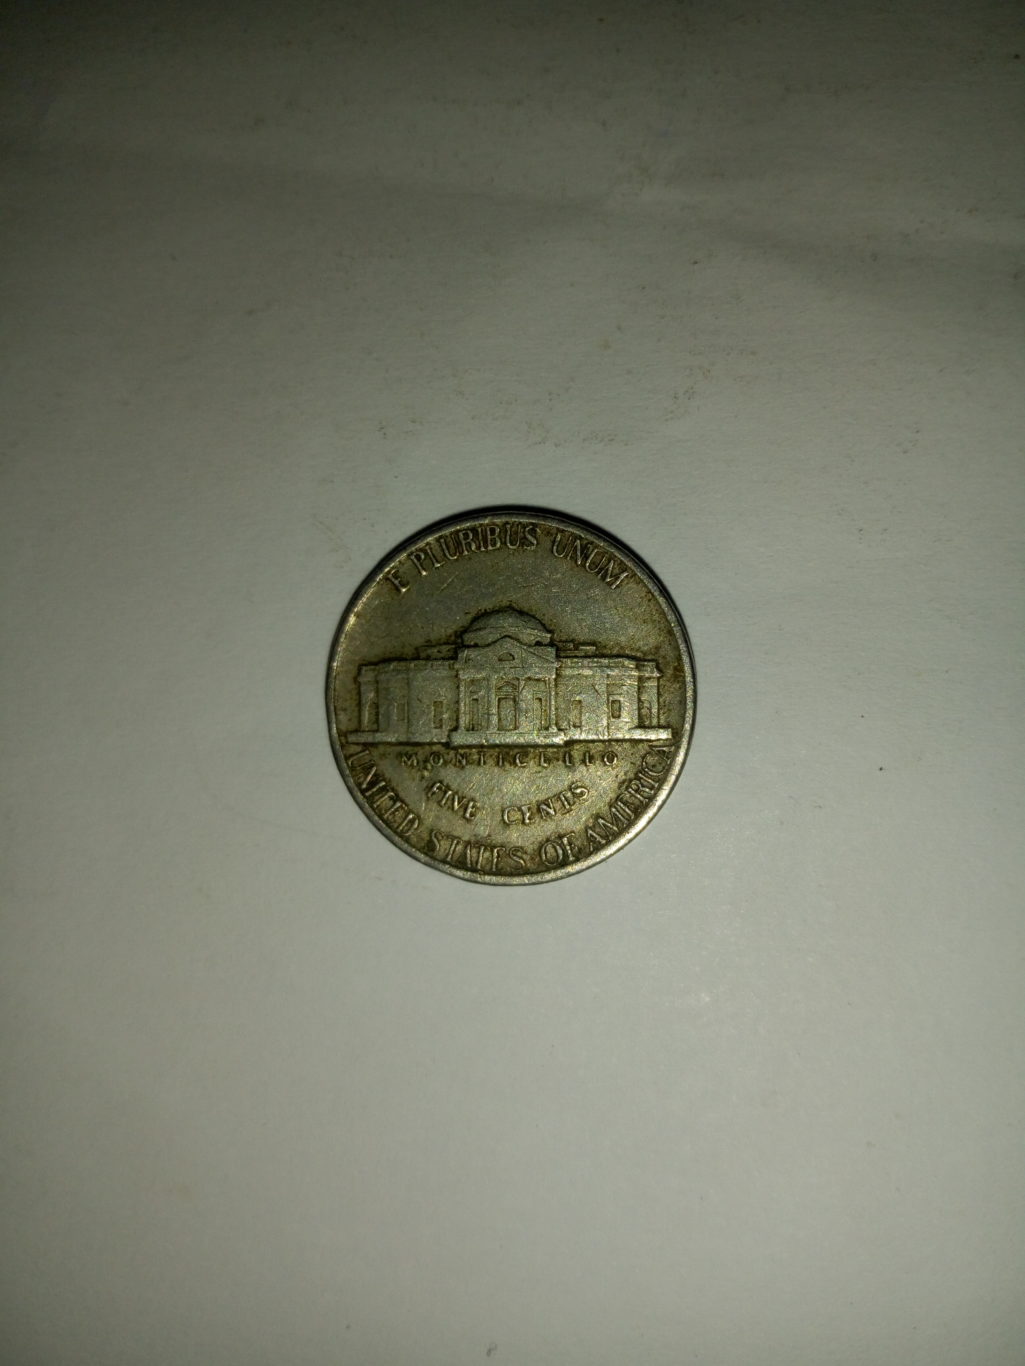 1978_united States of america 5 cents